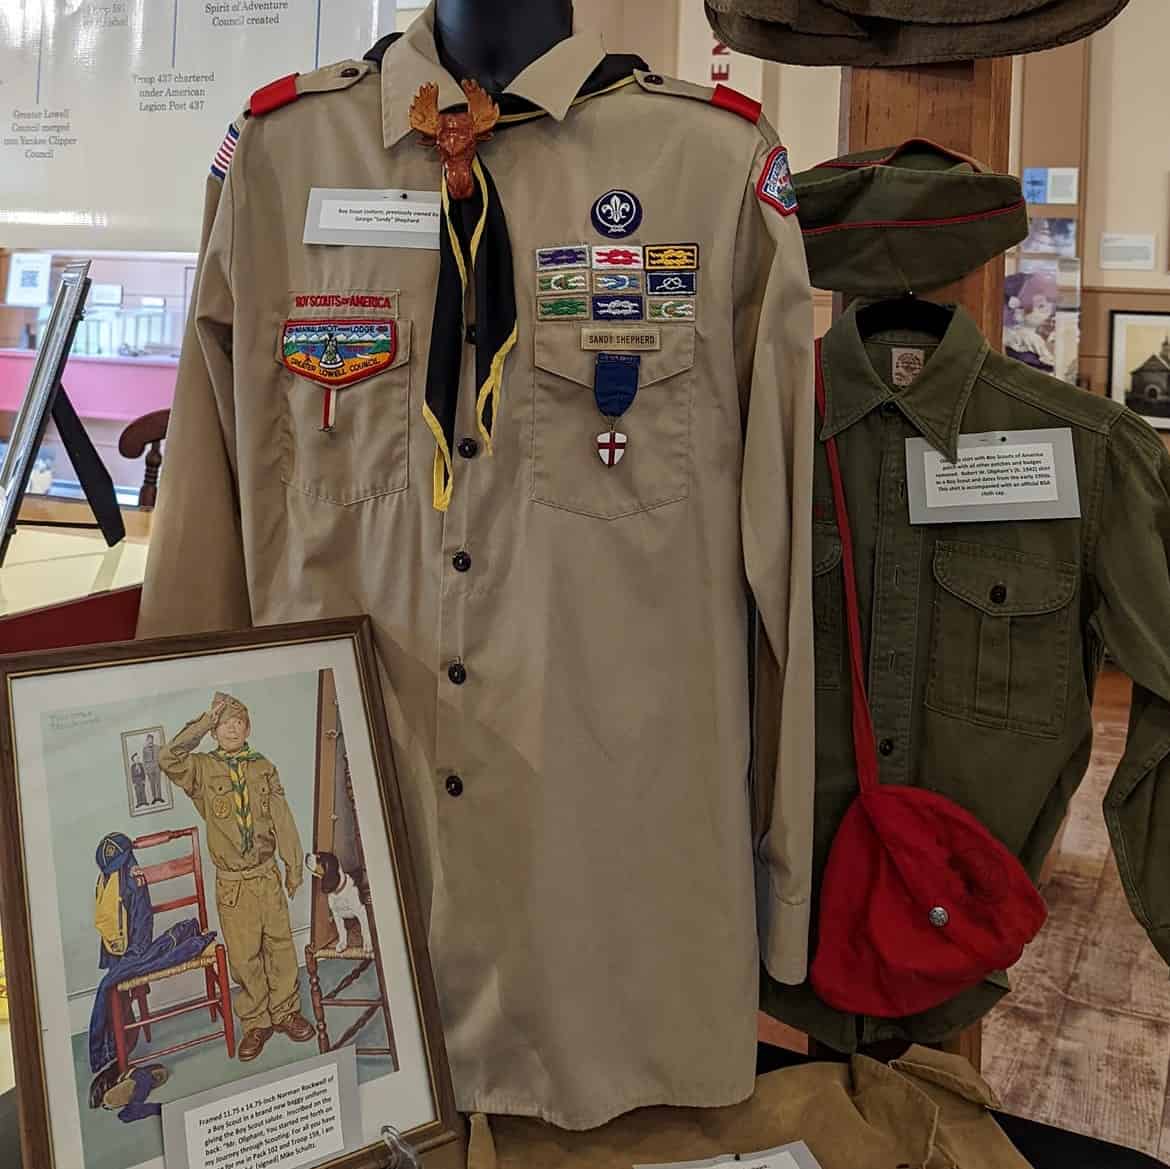 History of Boy Scouting in Westford